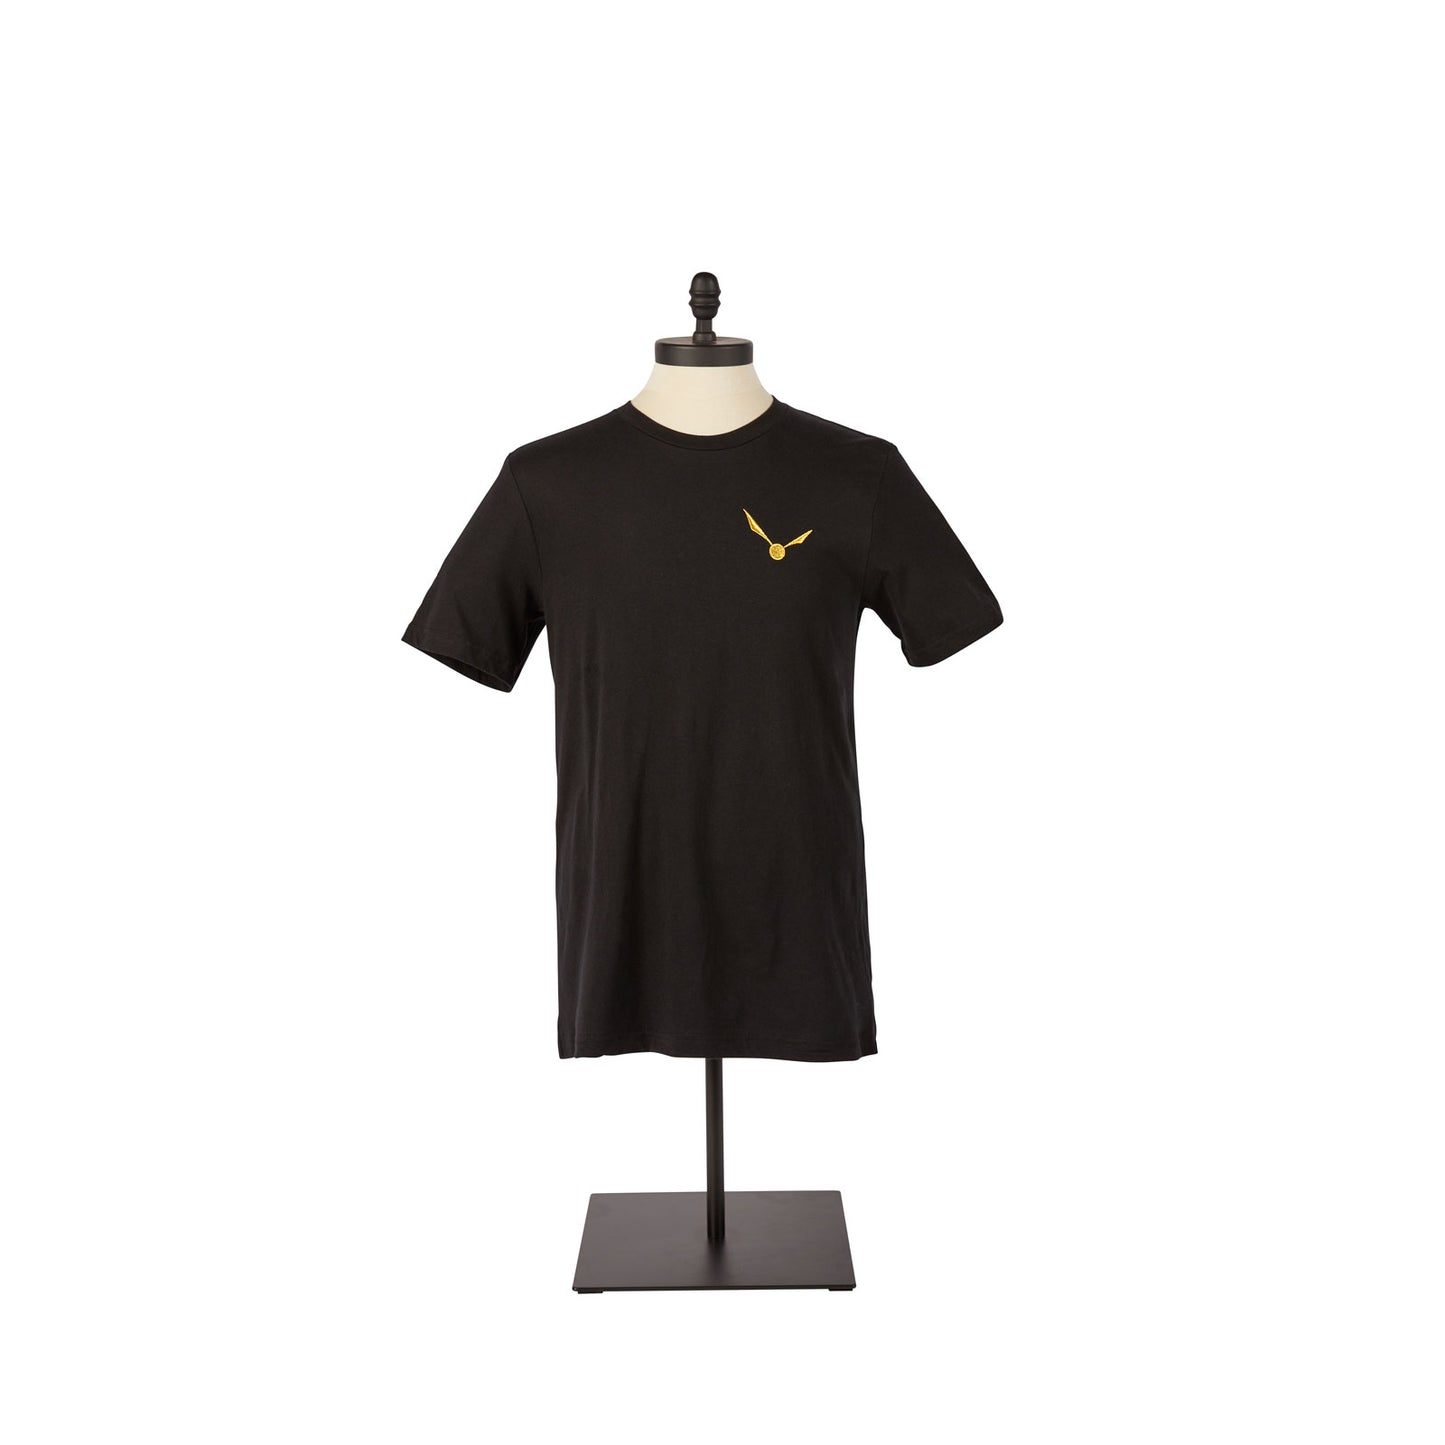 The Exhibition SNITCH™ Potter – T-SHIRT GOLDEN LOGO THE Harry